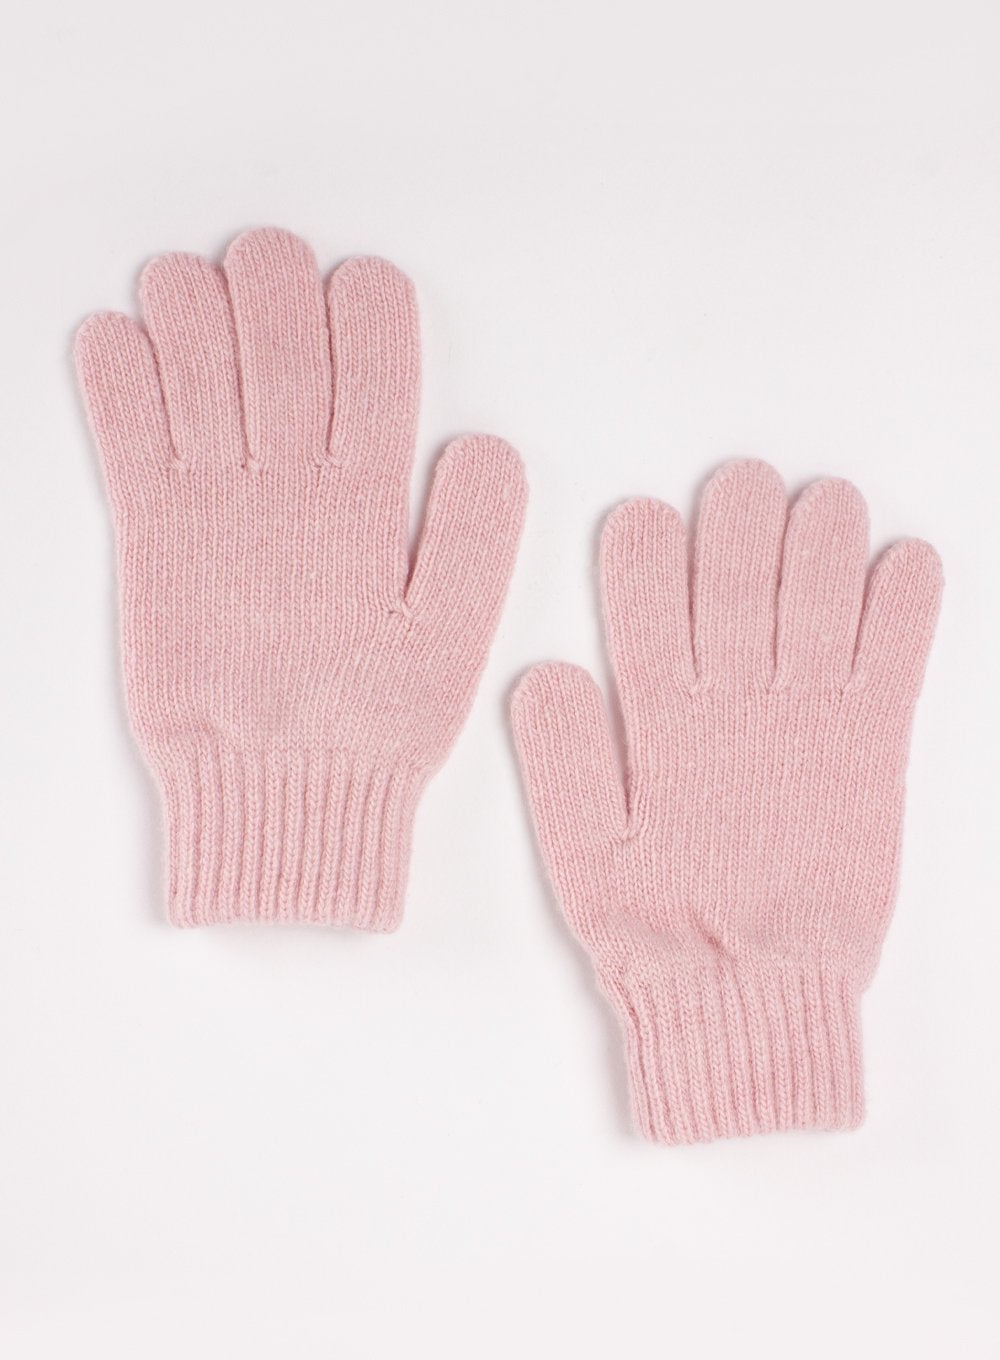 Chelsea Clothing Company Gloves Gloves in Pale Pink